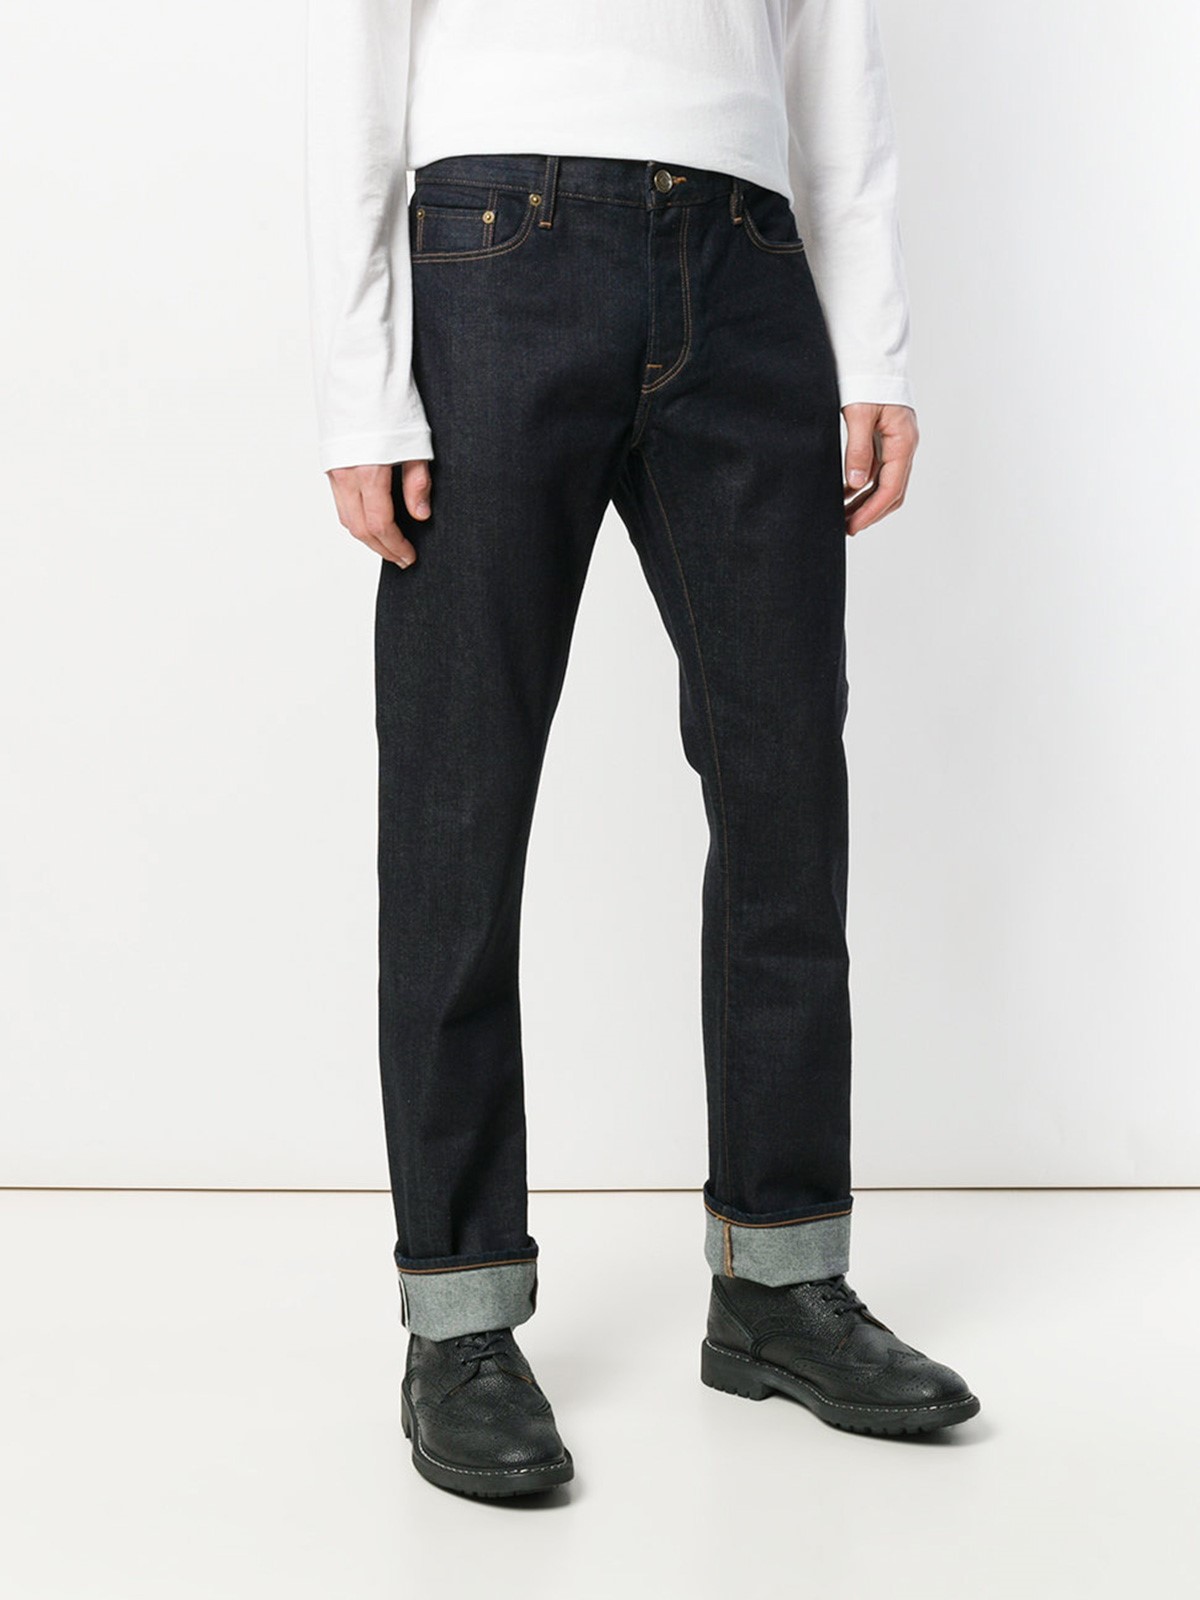 burberry STRAIGHT-LEG DENIM TROUSERS available on montiboutique.com - 21870